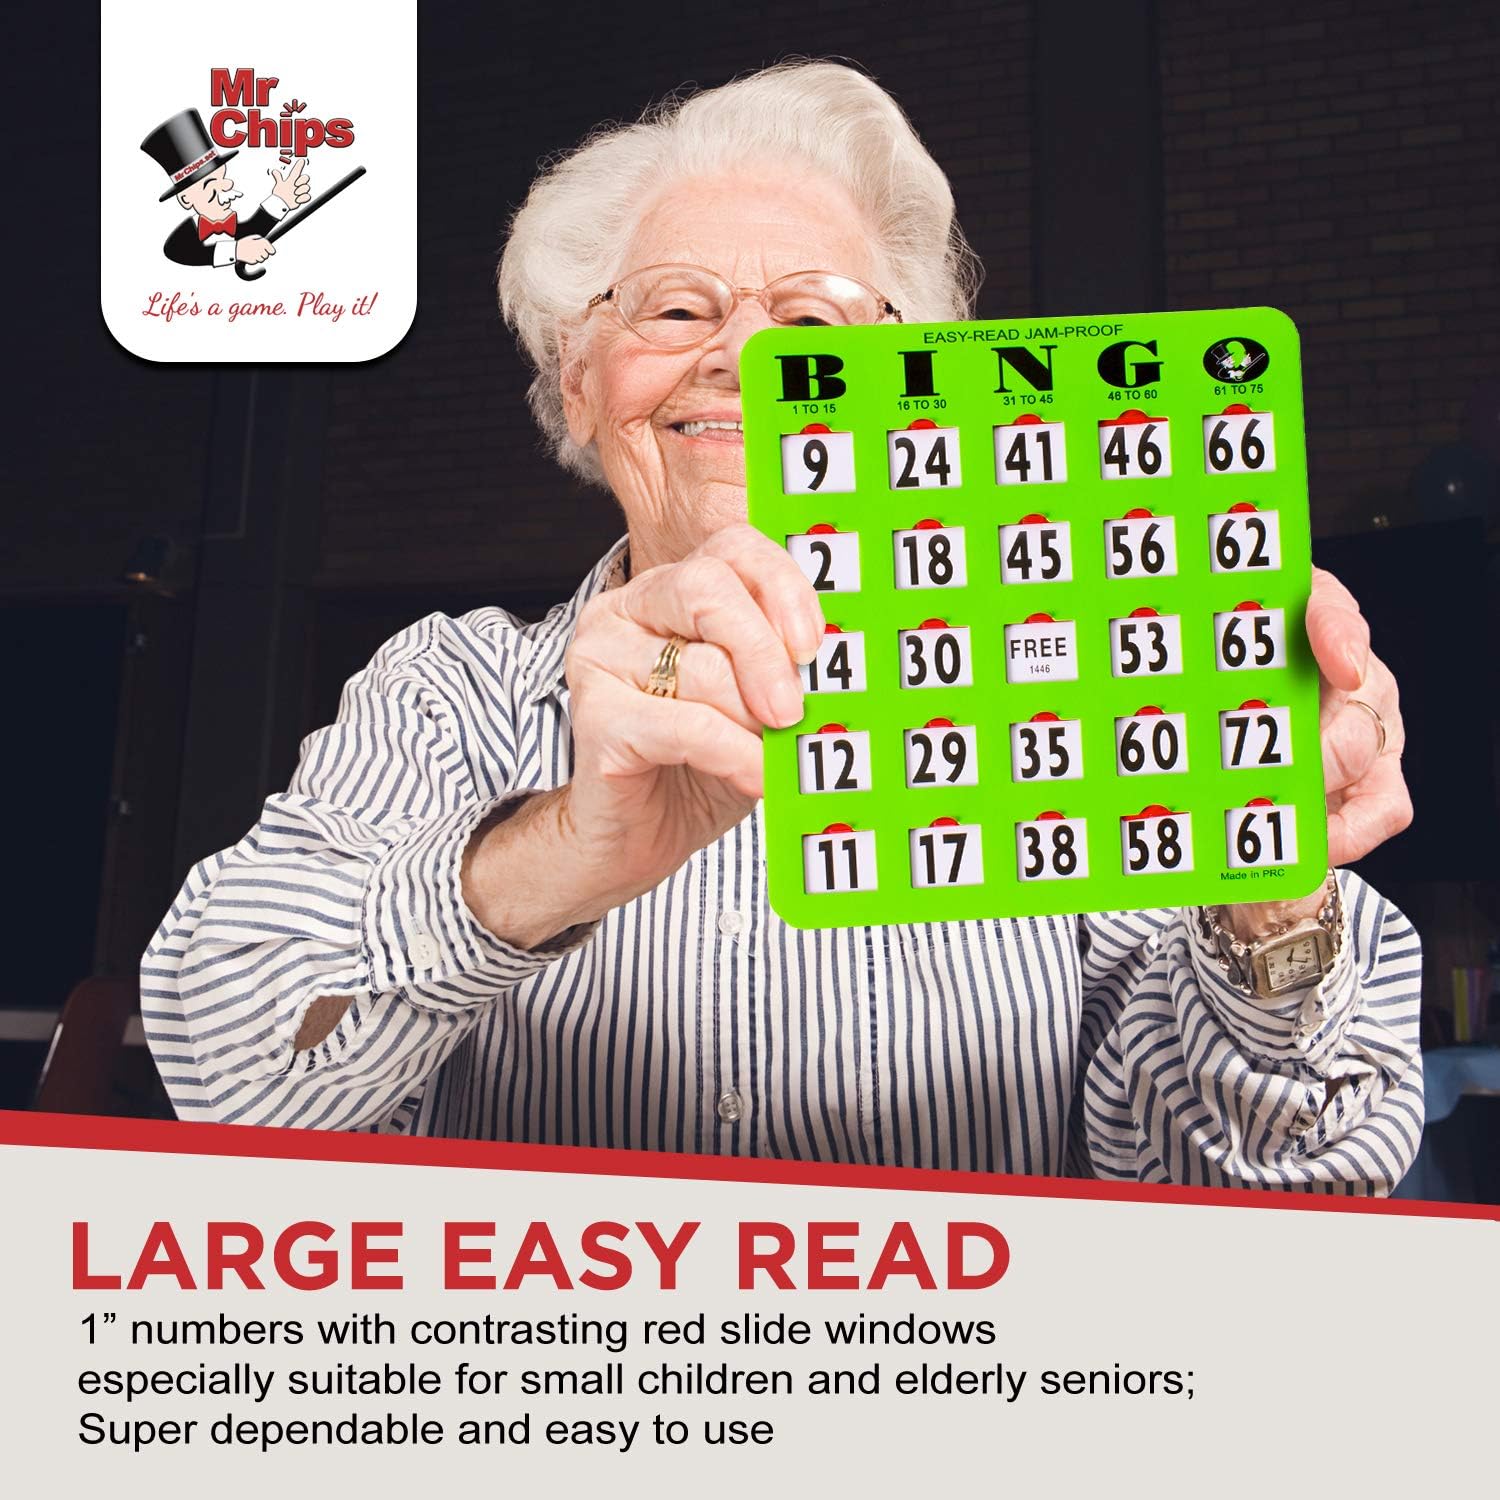 Complete Bingo Game W25 Easy Read Jam Proof Shutter Cards Mr Chips Store 